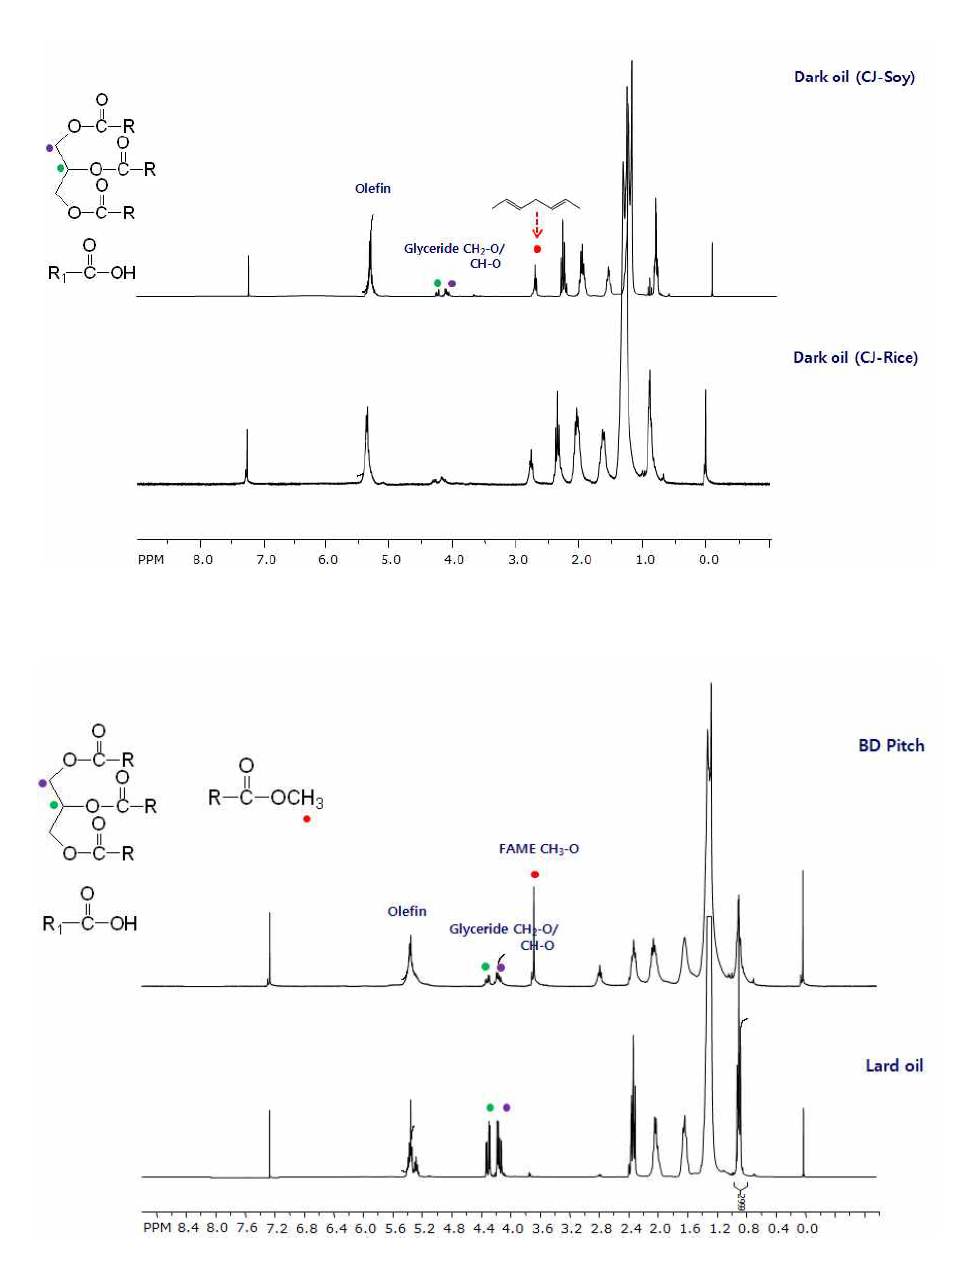 1H-NMR spectra of used fat and vegetable oil.